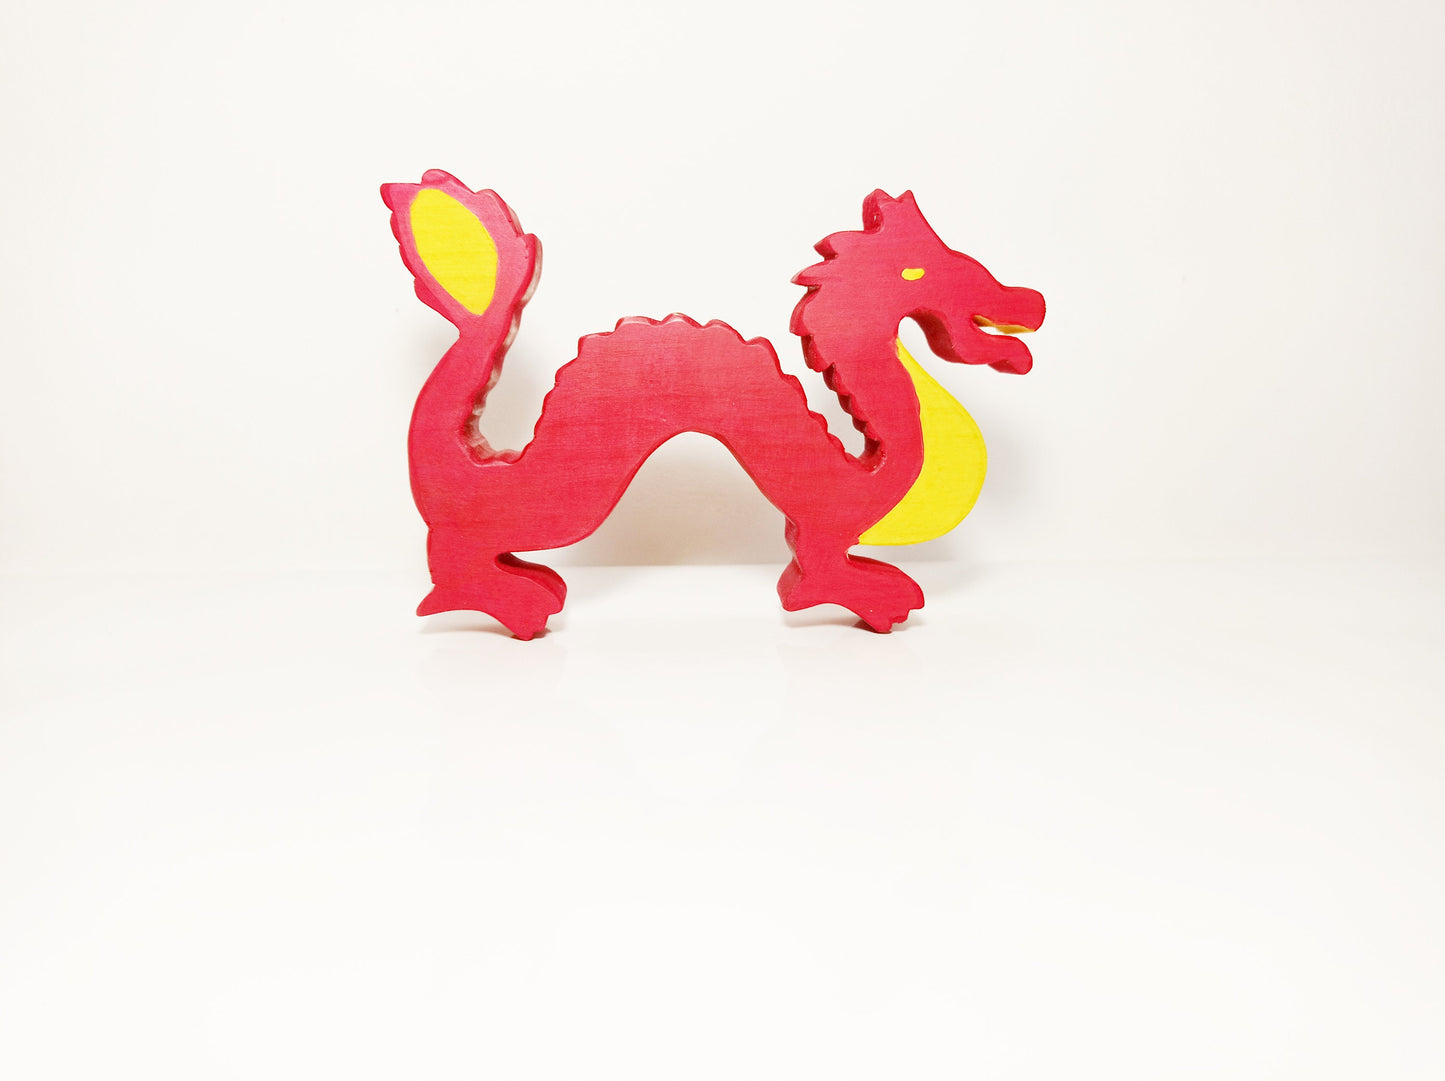 Red dragon wooden toy, waldorf inspired wooden toy, dragon wooden toy, wooden toy, gift for kids, handmade wooden toy, waldorf inspired